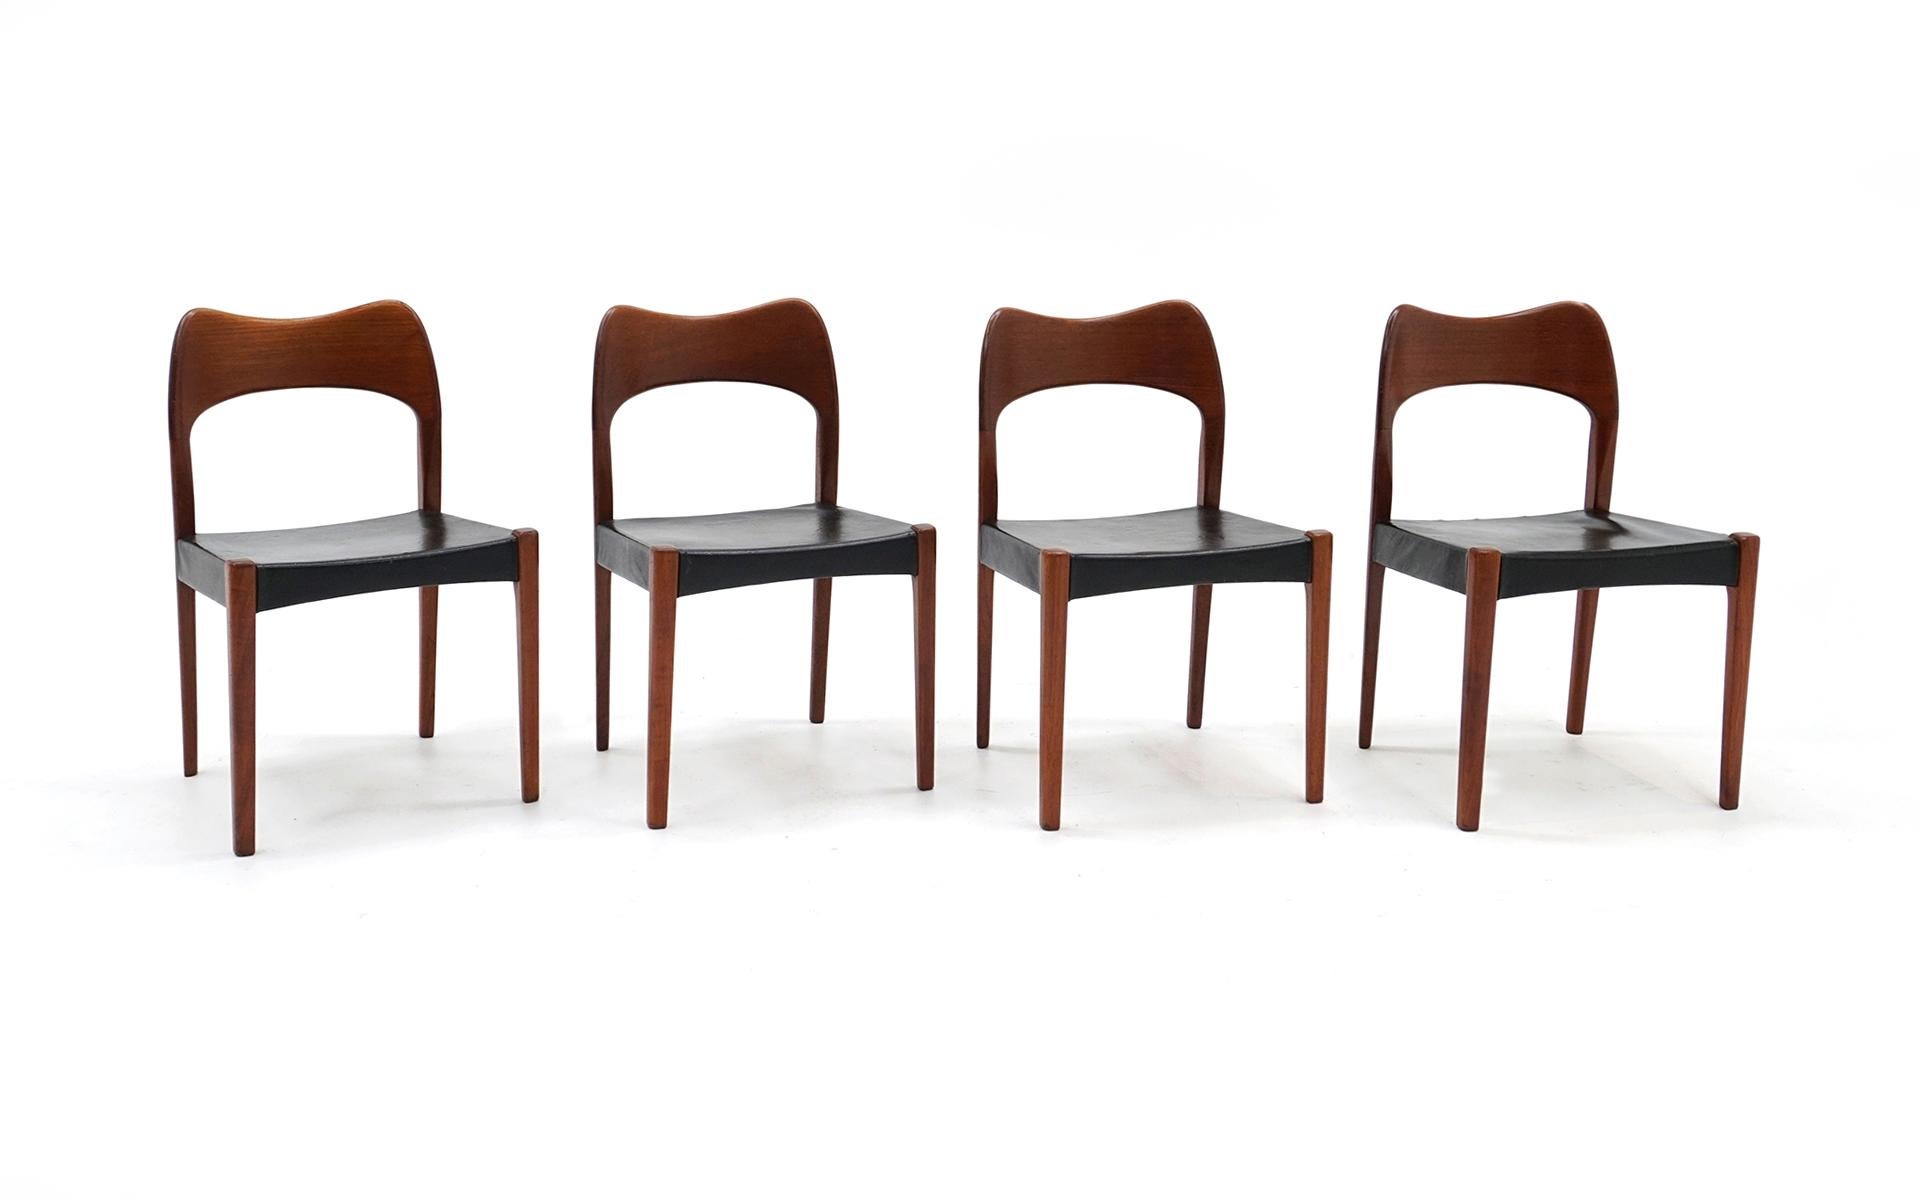 Set of 8 dining chairs designed by Niels Otto Møller and made by J. L. Møller Møbelfabrik. These chairs are model number 71. Completely original condition. Ready to use. There may be small blemishes, but the condition is very good. The black leather